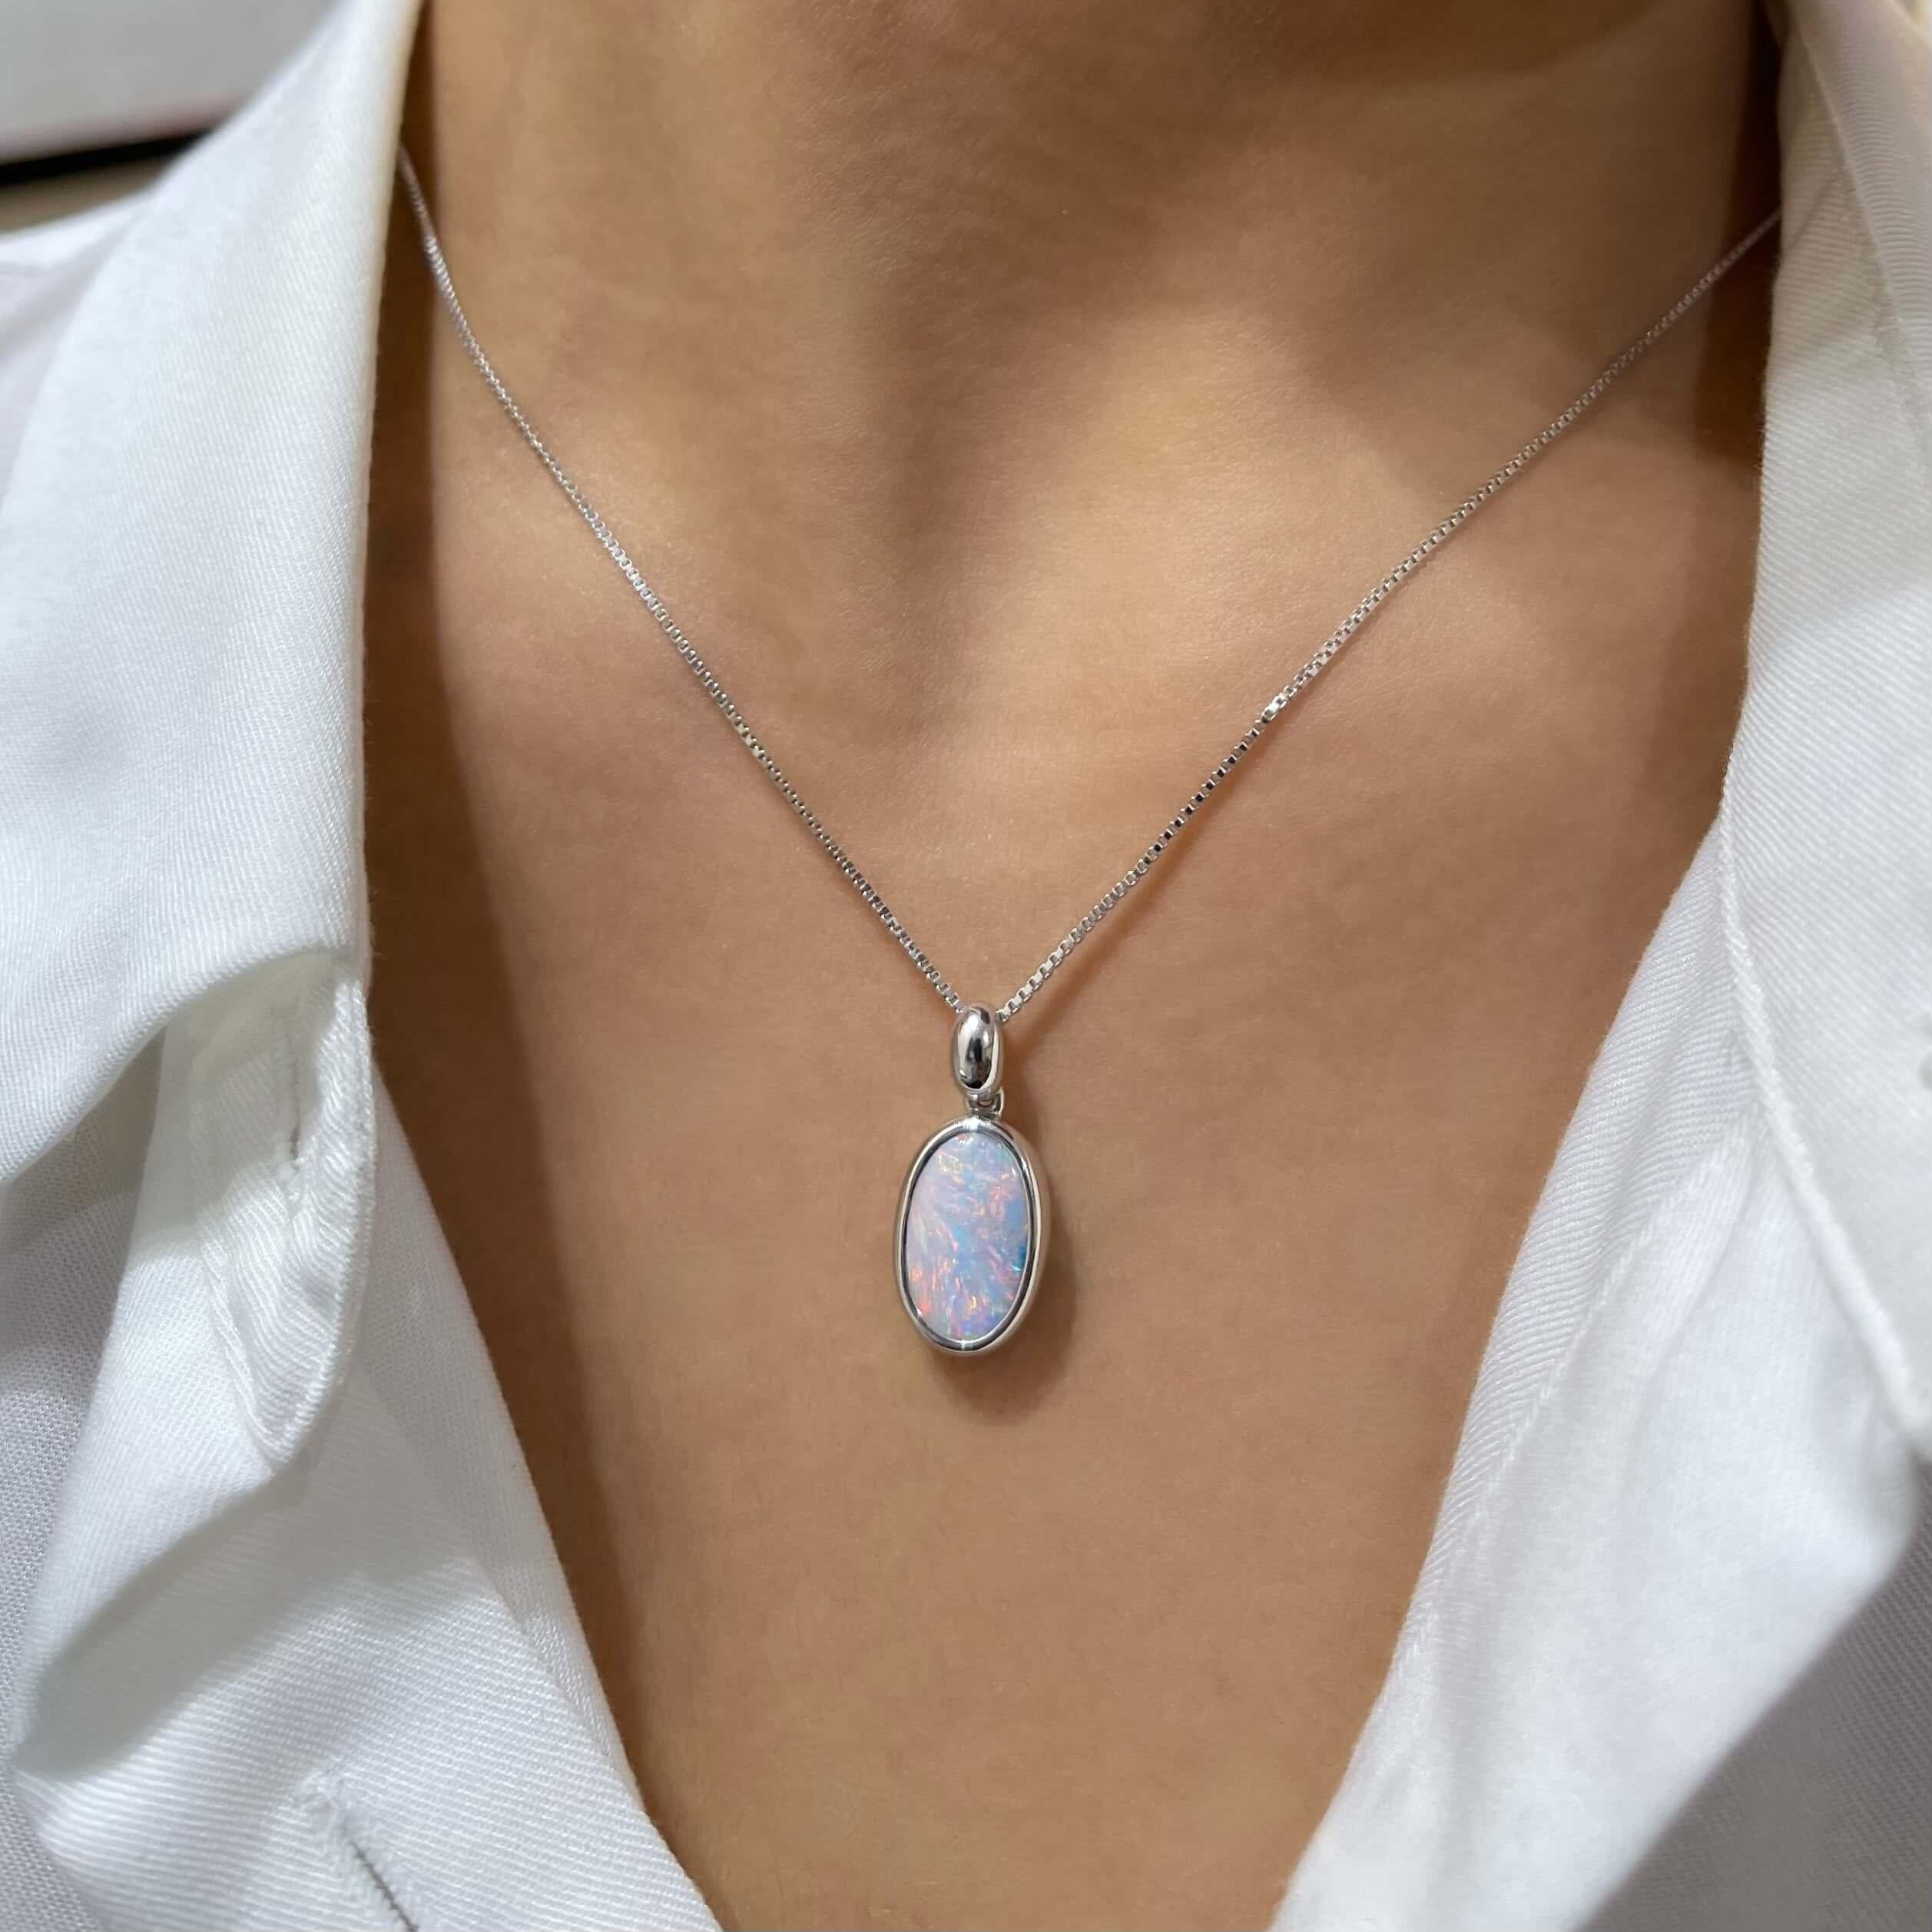 “Margaret” opal pendant features a charismatic boulder opal (3.38ct) ethically sourced from our Jundah-Opalville mines in Queensland, Australia, bound to inspire awe and admiration. Set in our stunning 18K white gold, the intriguing green, pink and